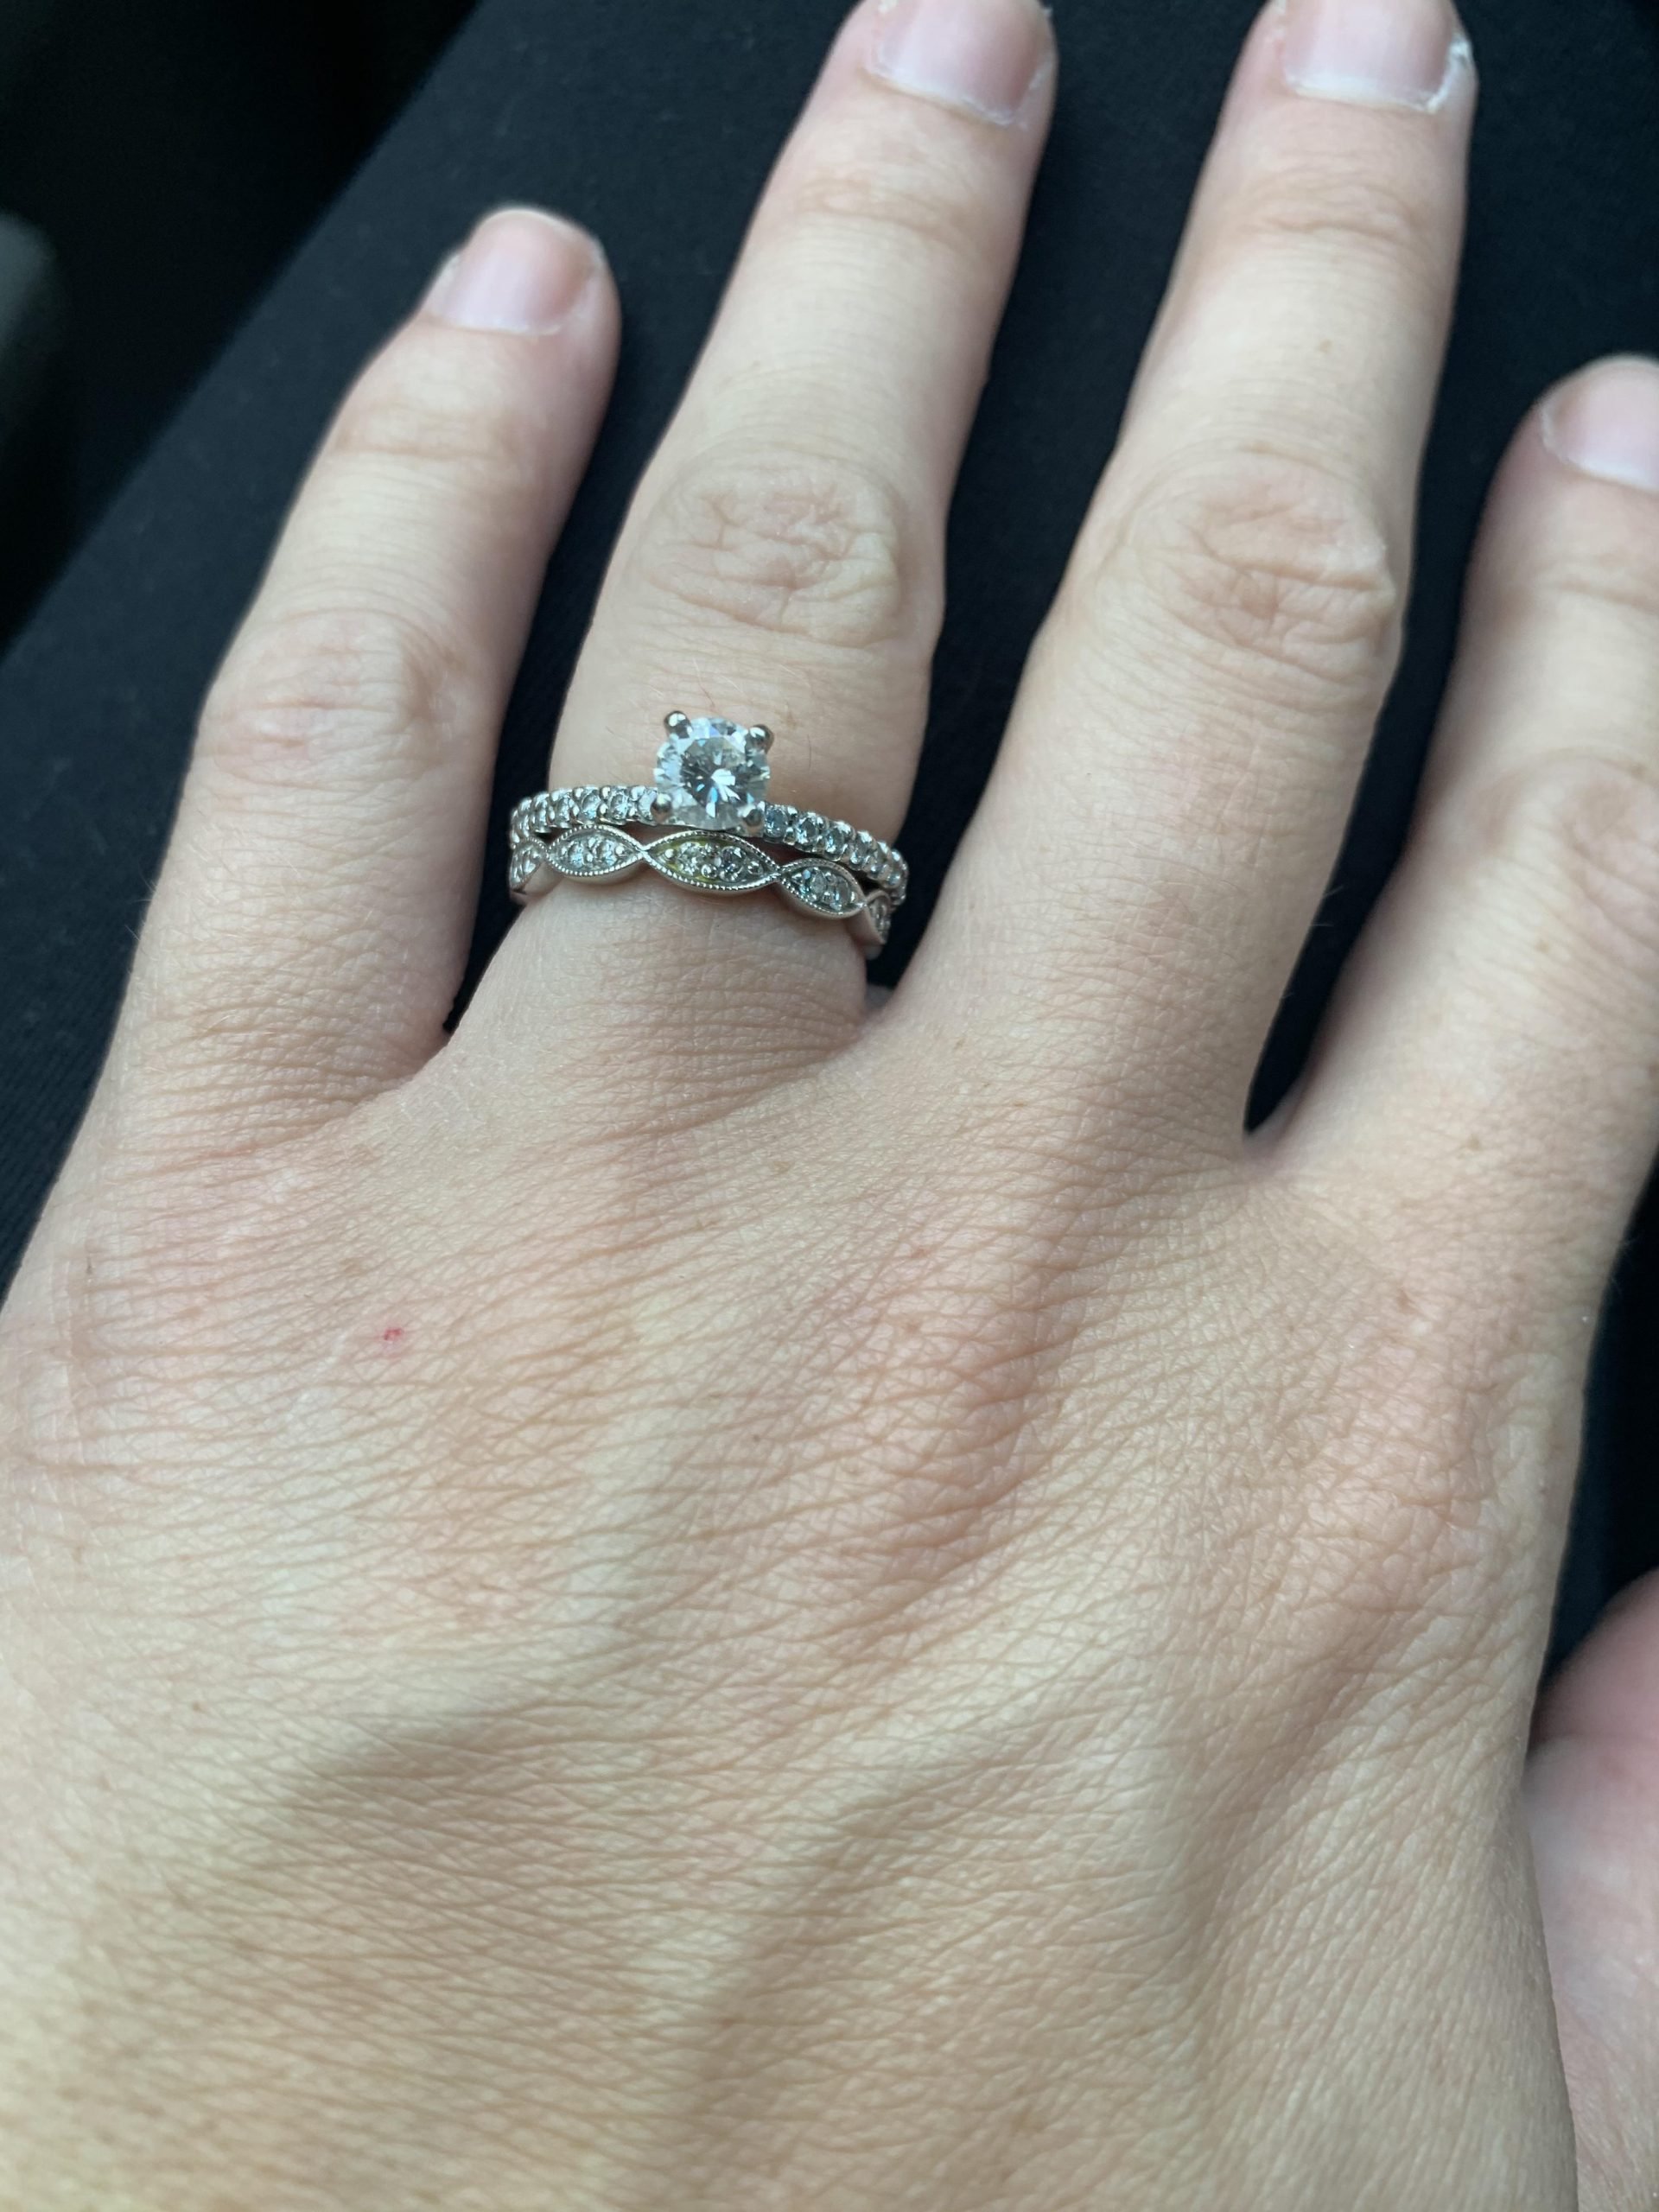 Engagement ring and wedding band